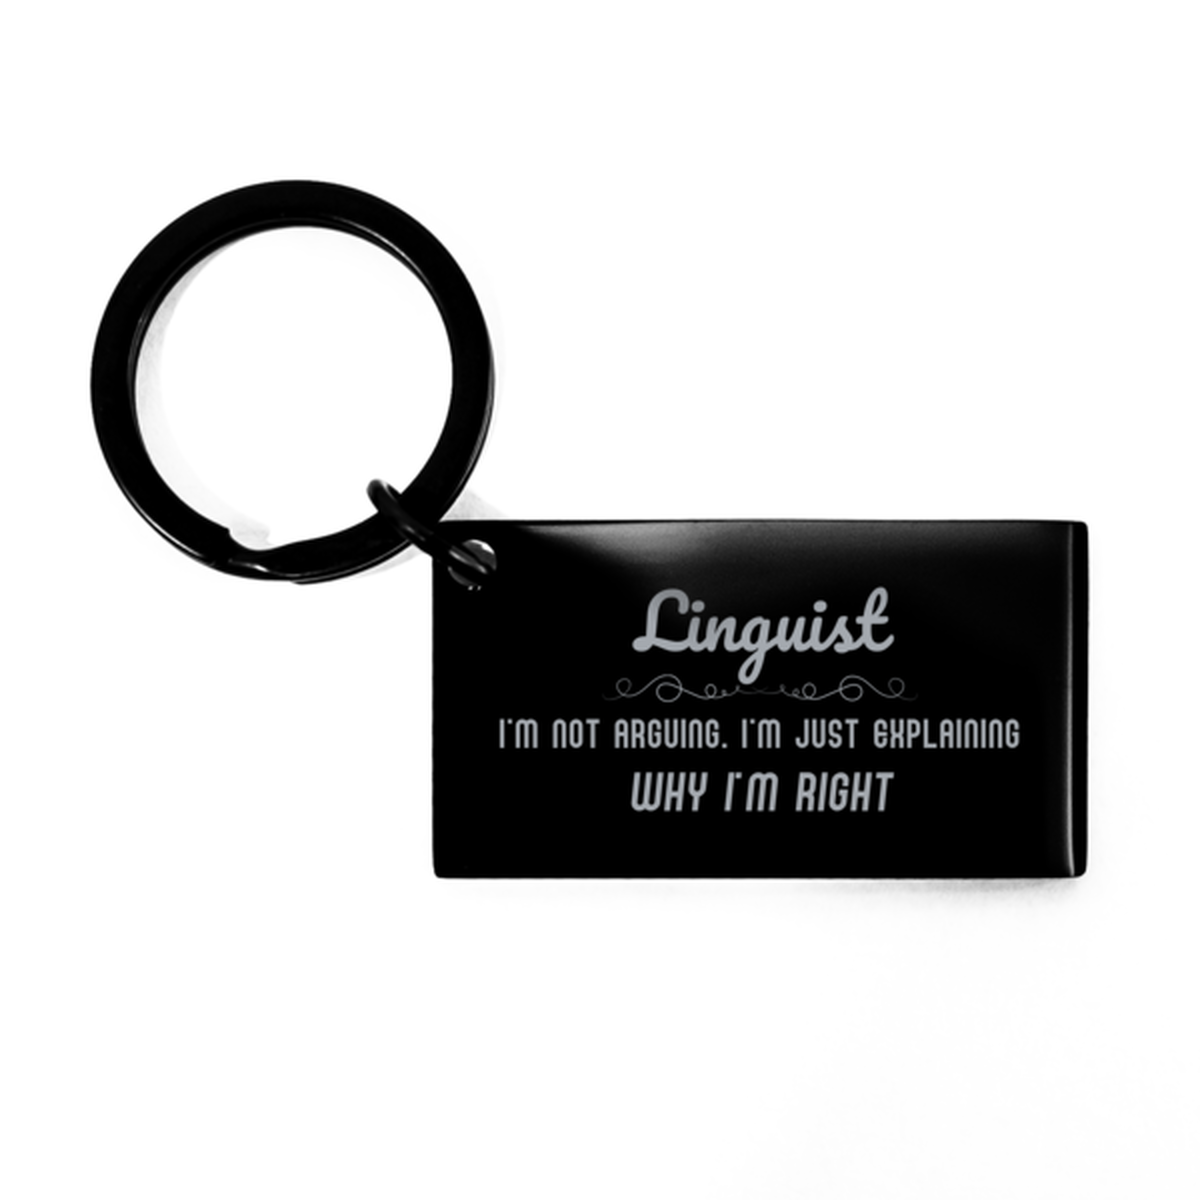 Linguist I'm not Arguing. I'm Just Explaining Why I'm RIGHT Keychain, Funny Saying Quote Linguist Gifts For Linguist Graduation Birthday Christmas Gifts for Men Women Coworker